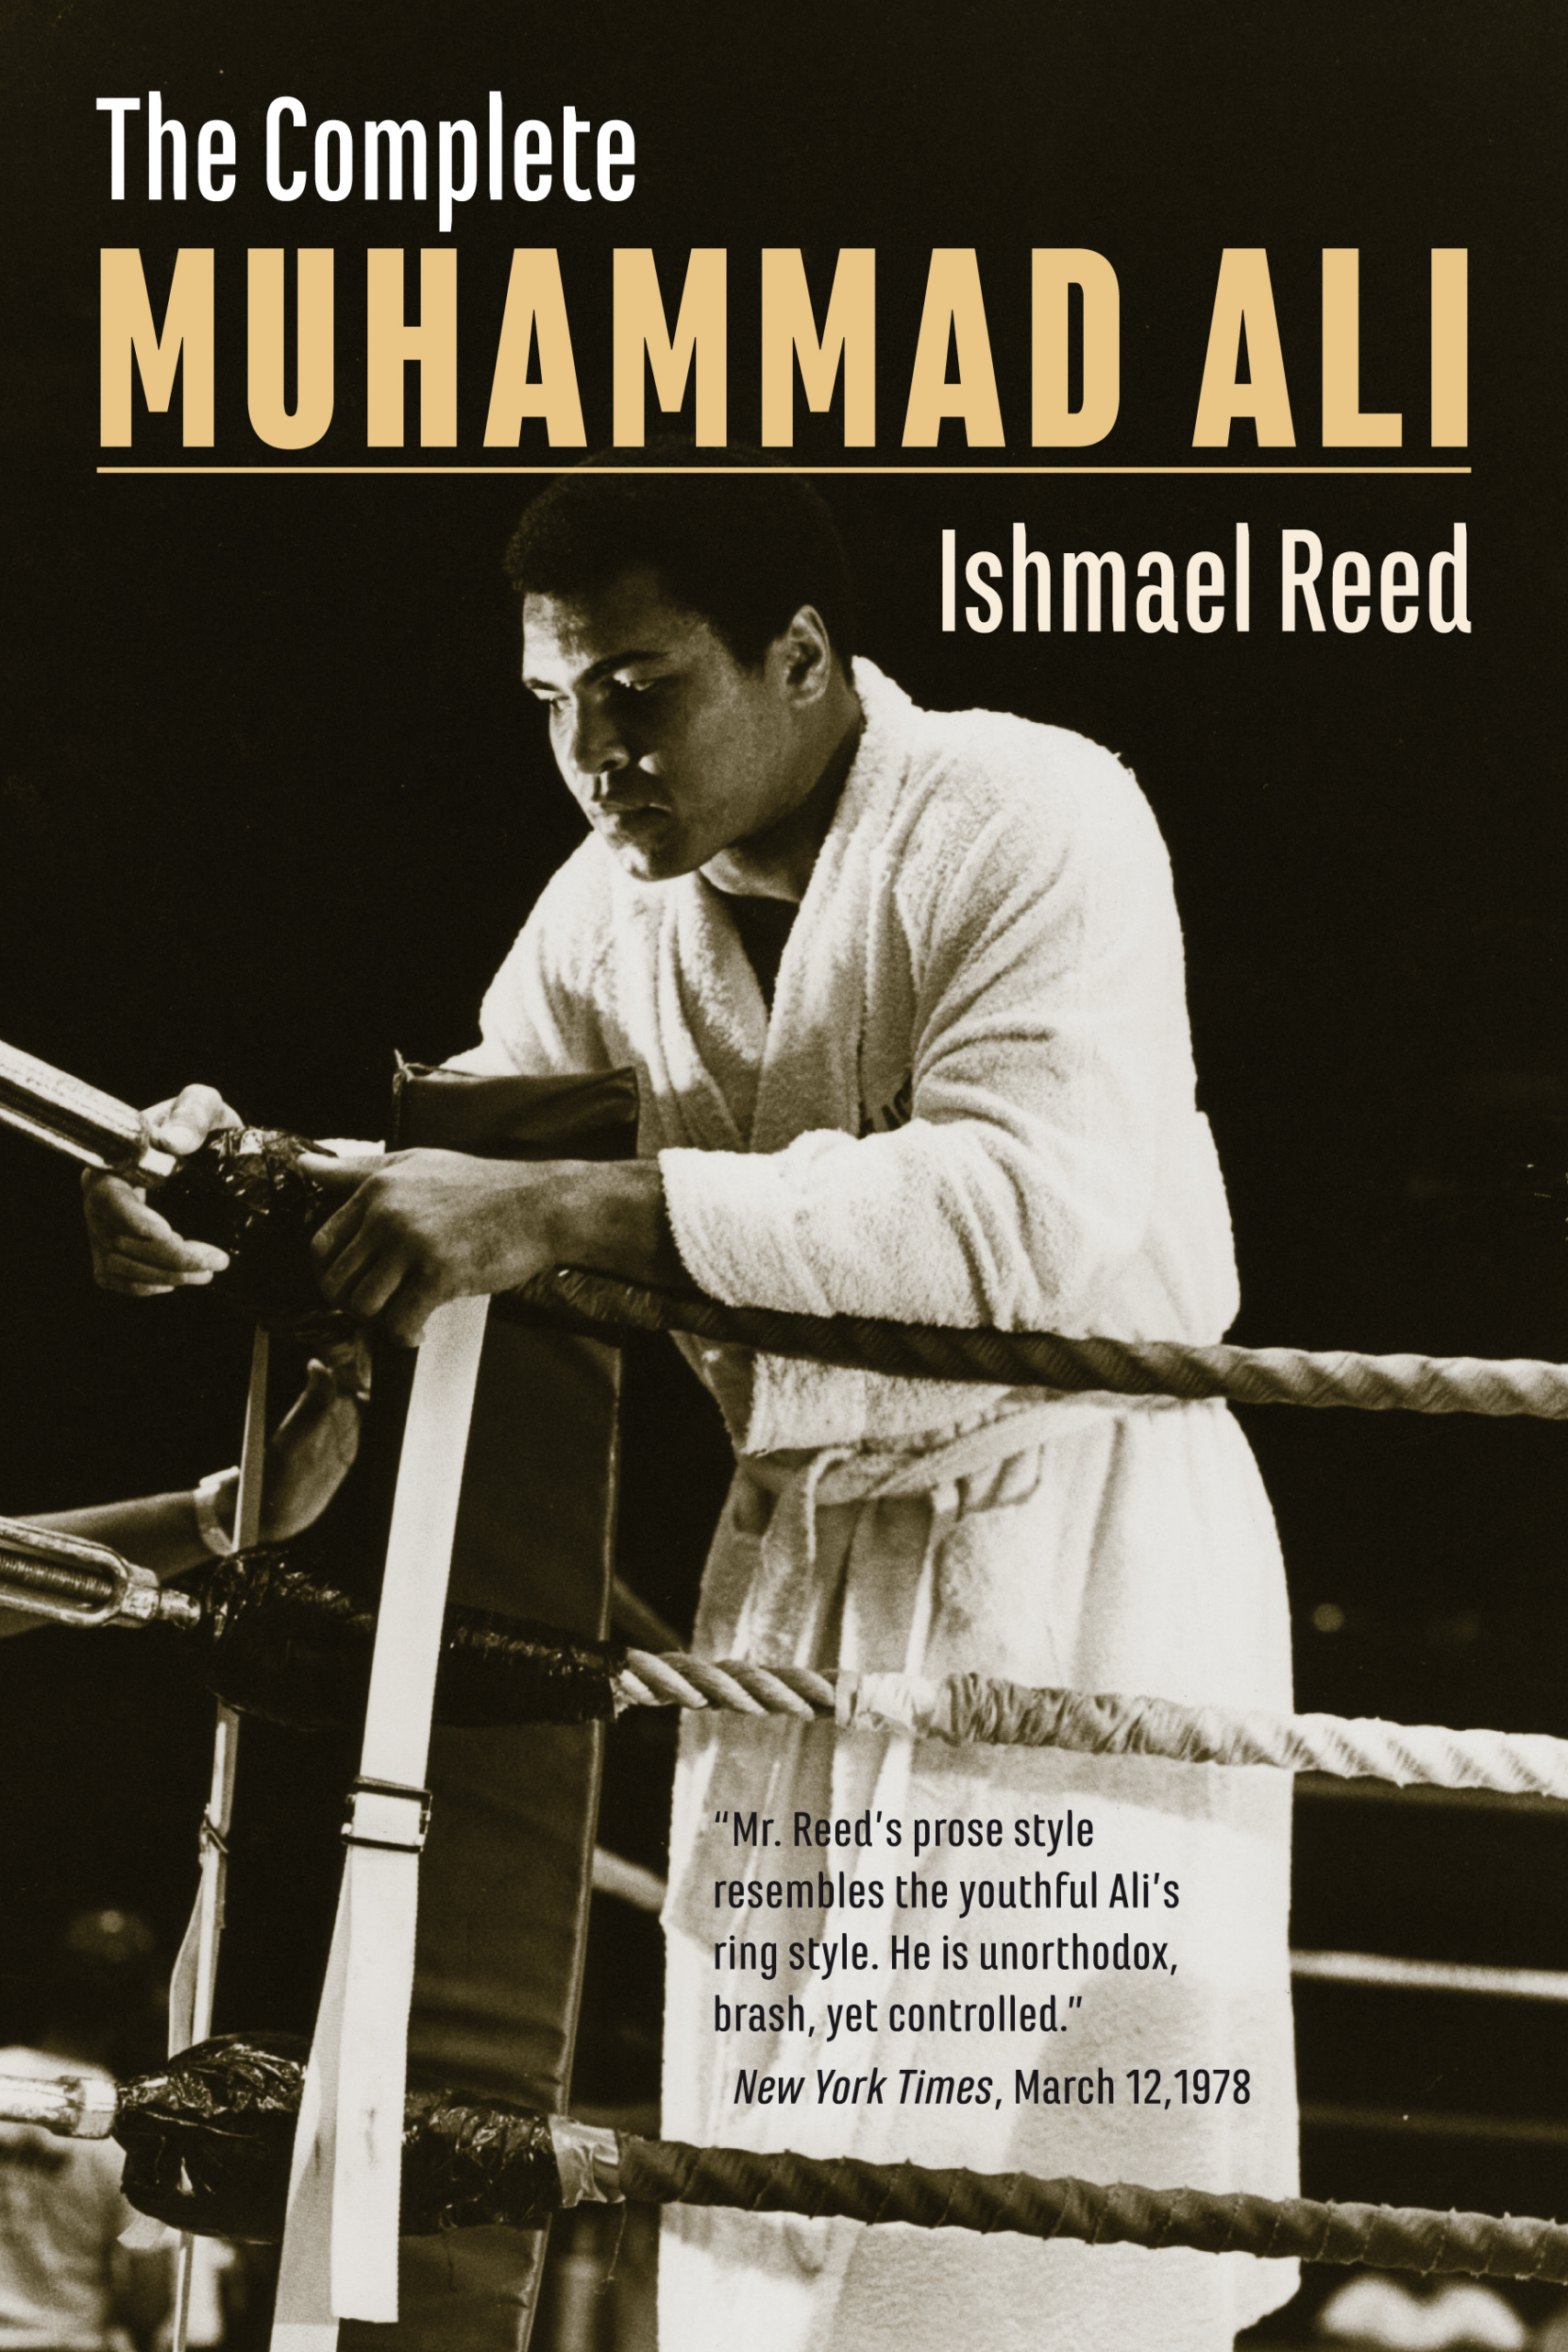 The cover of The Complete Muhammad Ali 